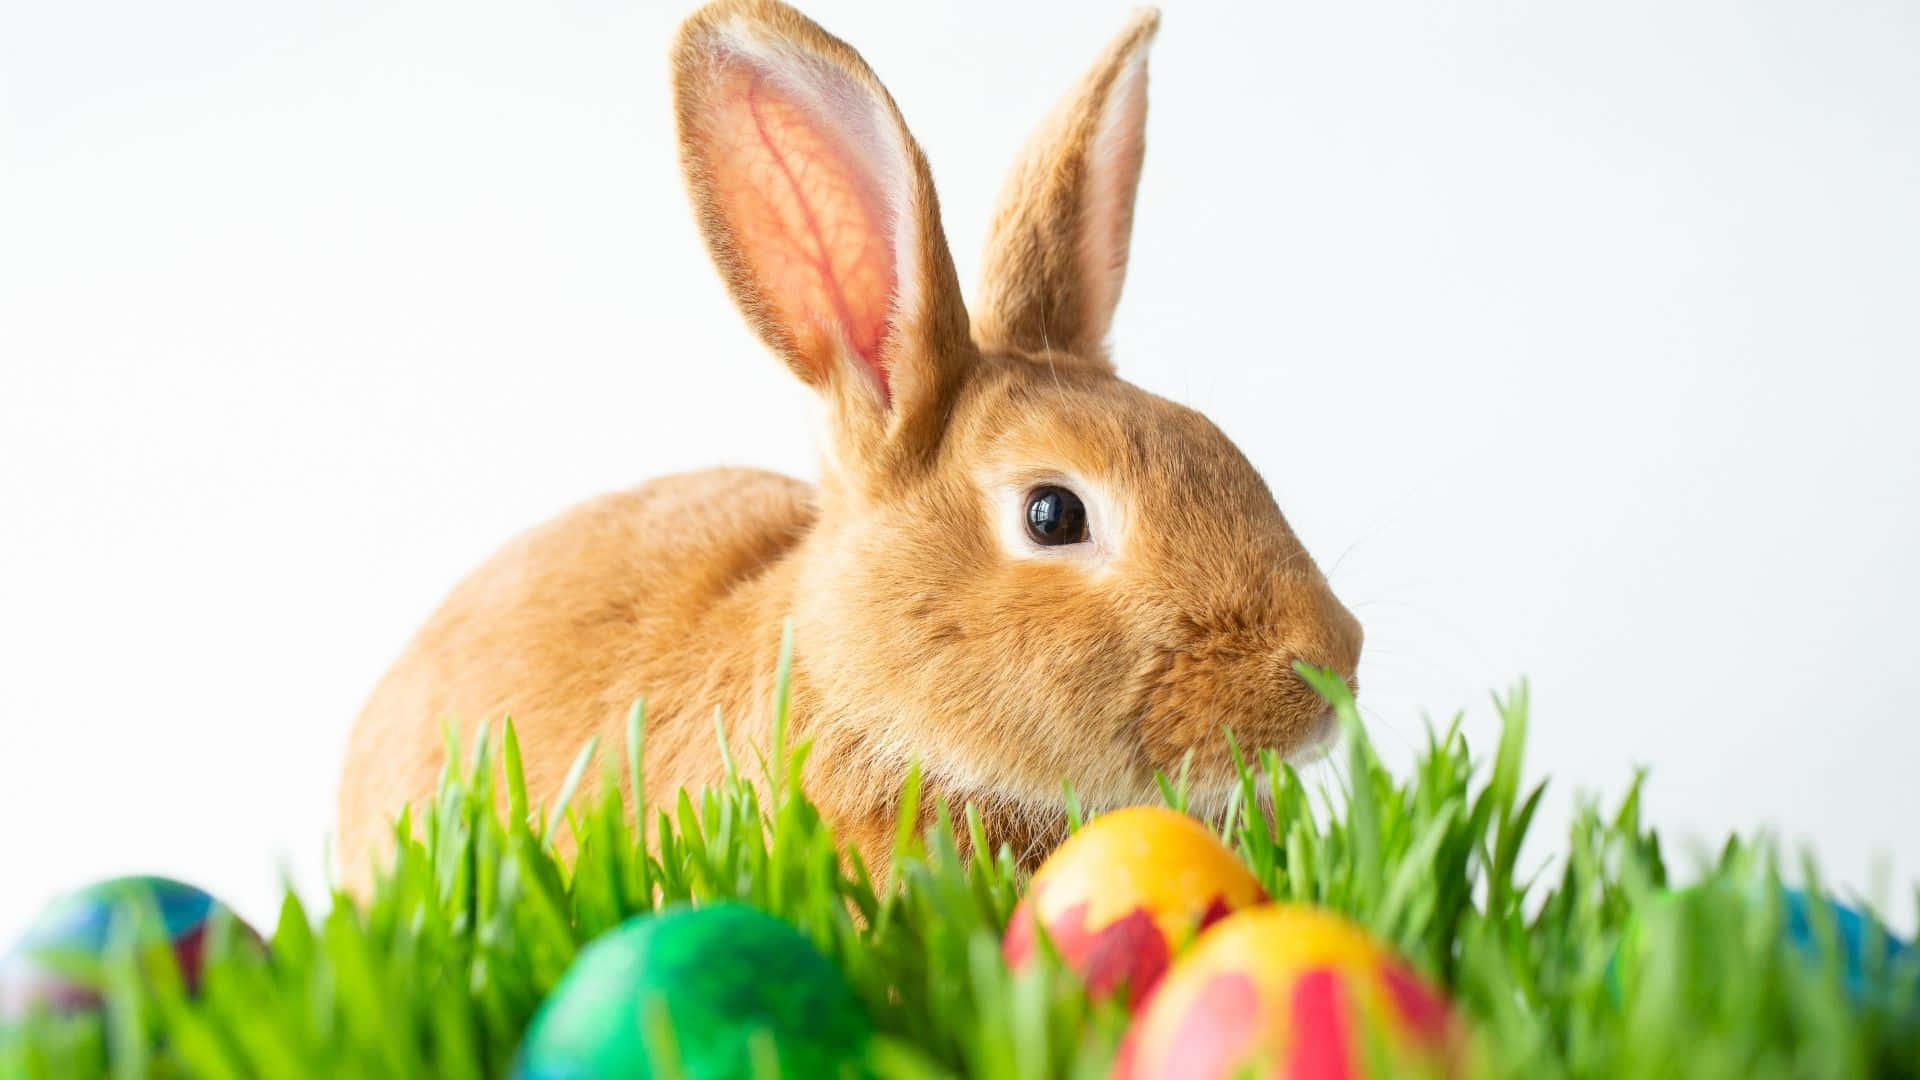 Get Ready For Easter Egg Hunt With The Easter Bunny!